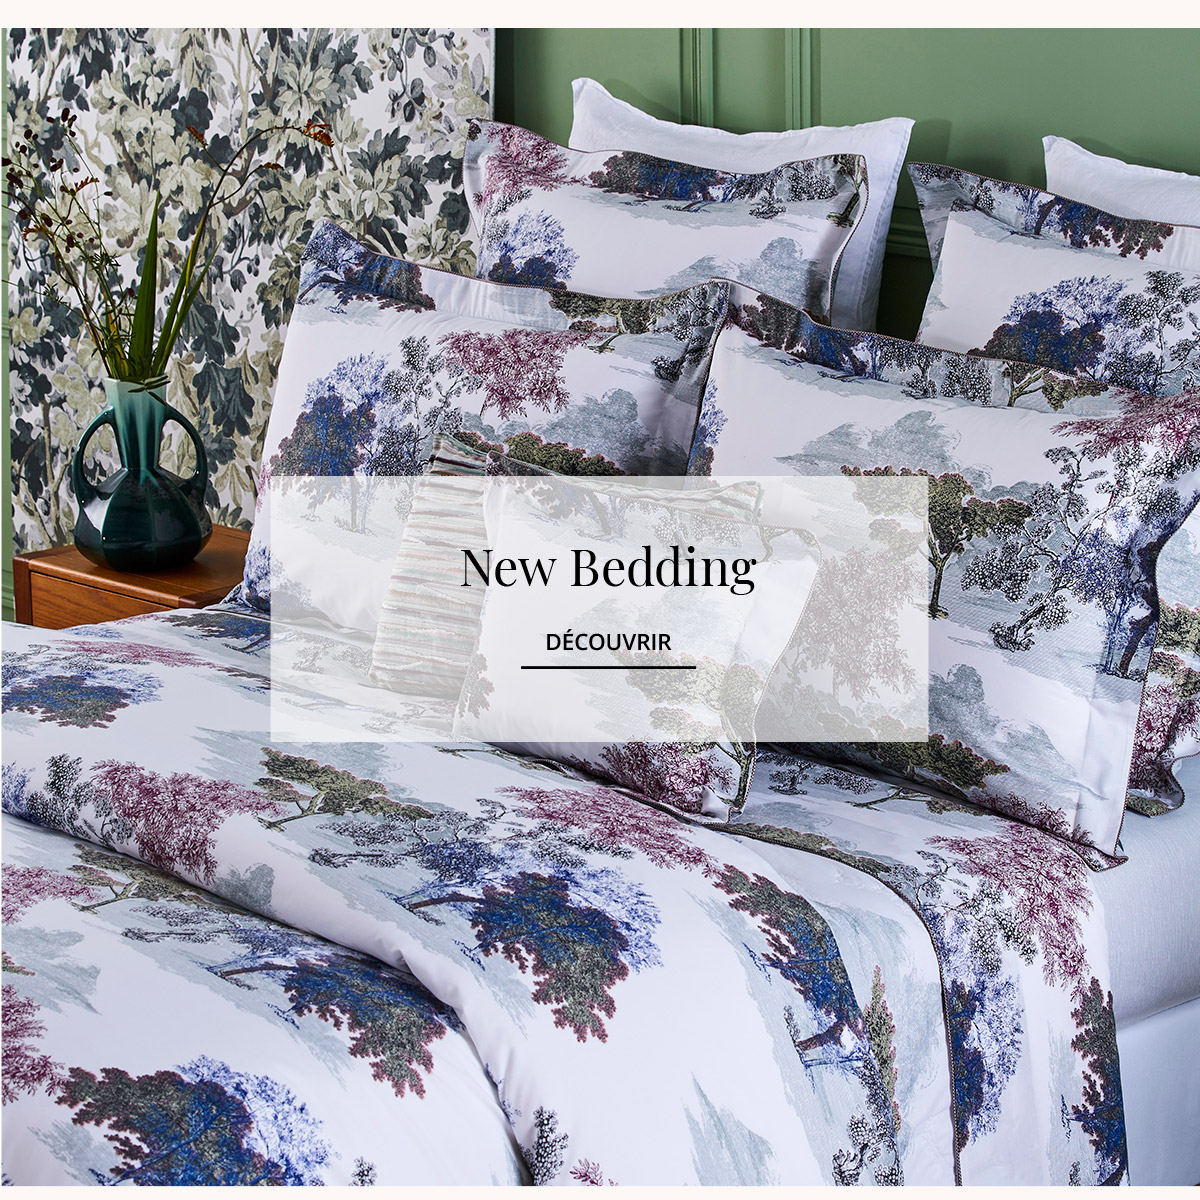 Luxury Bedding, Bath & Home Accents | Yves Delorme